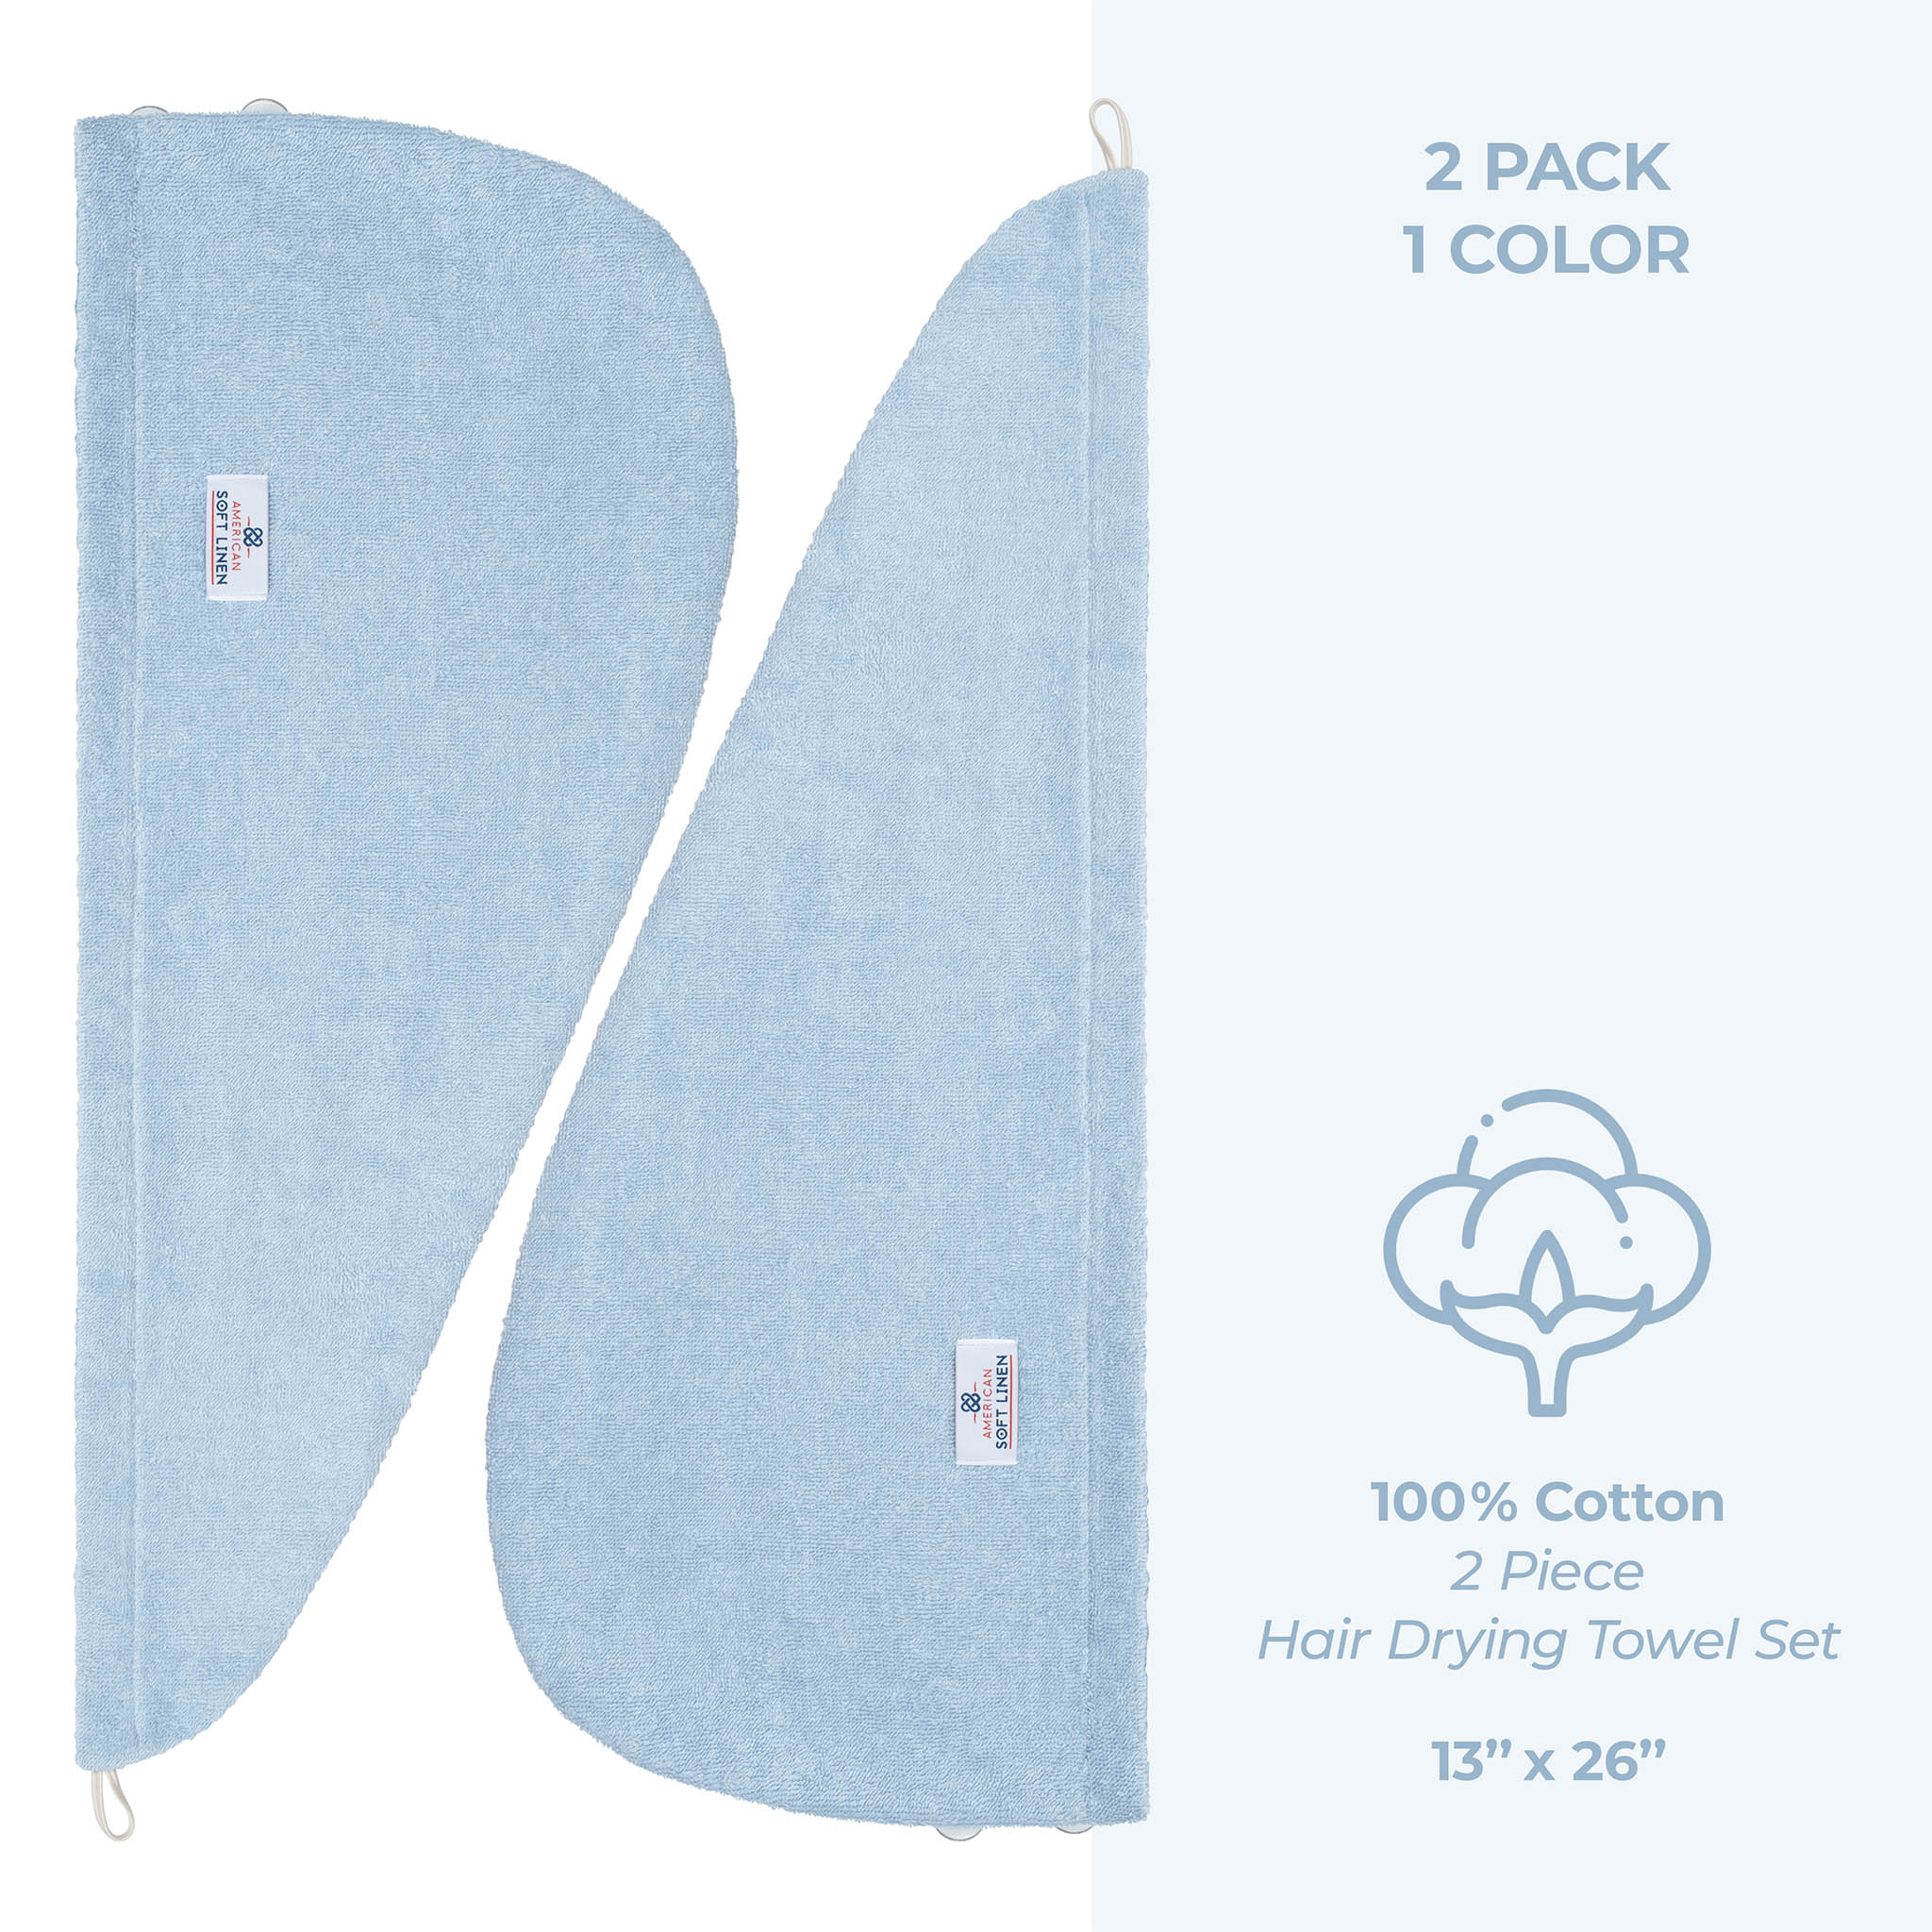 American Soft Linen 100% Cotton Hair Drying Towels for Women 2 pack 75 set case pack sky-blue-4